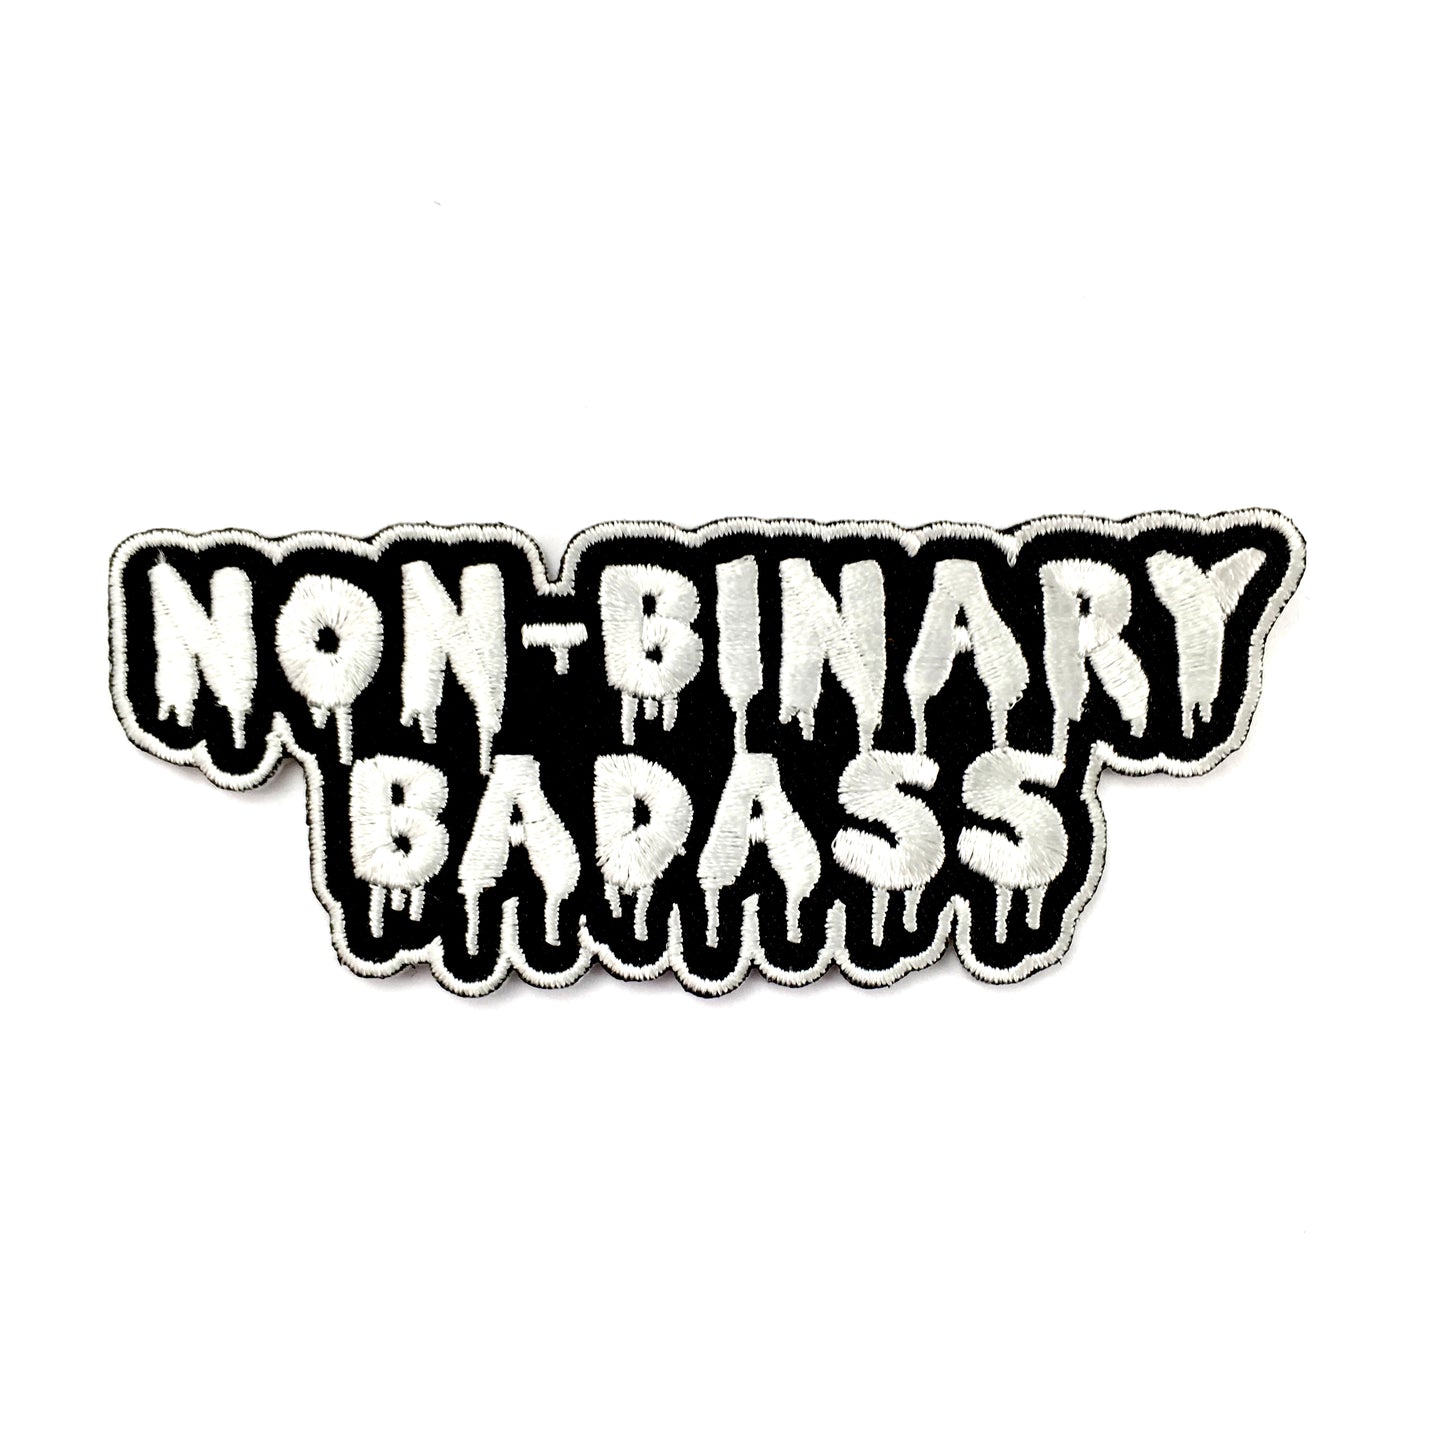 Non-Binary Badass Iron-On Embroidered Patch